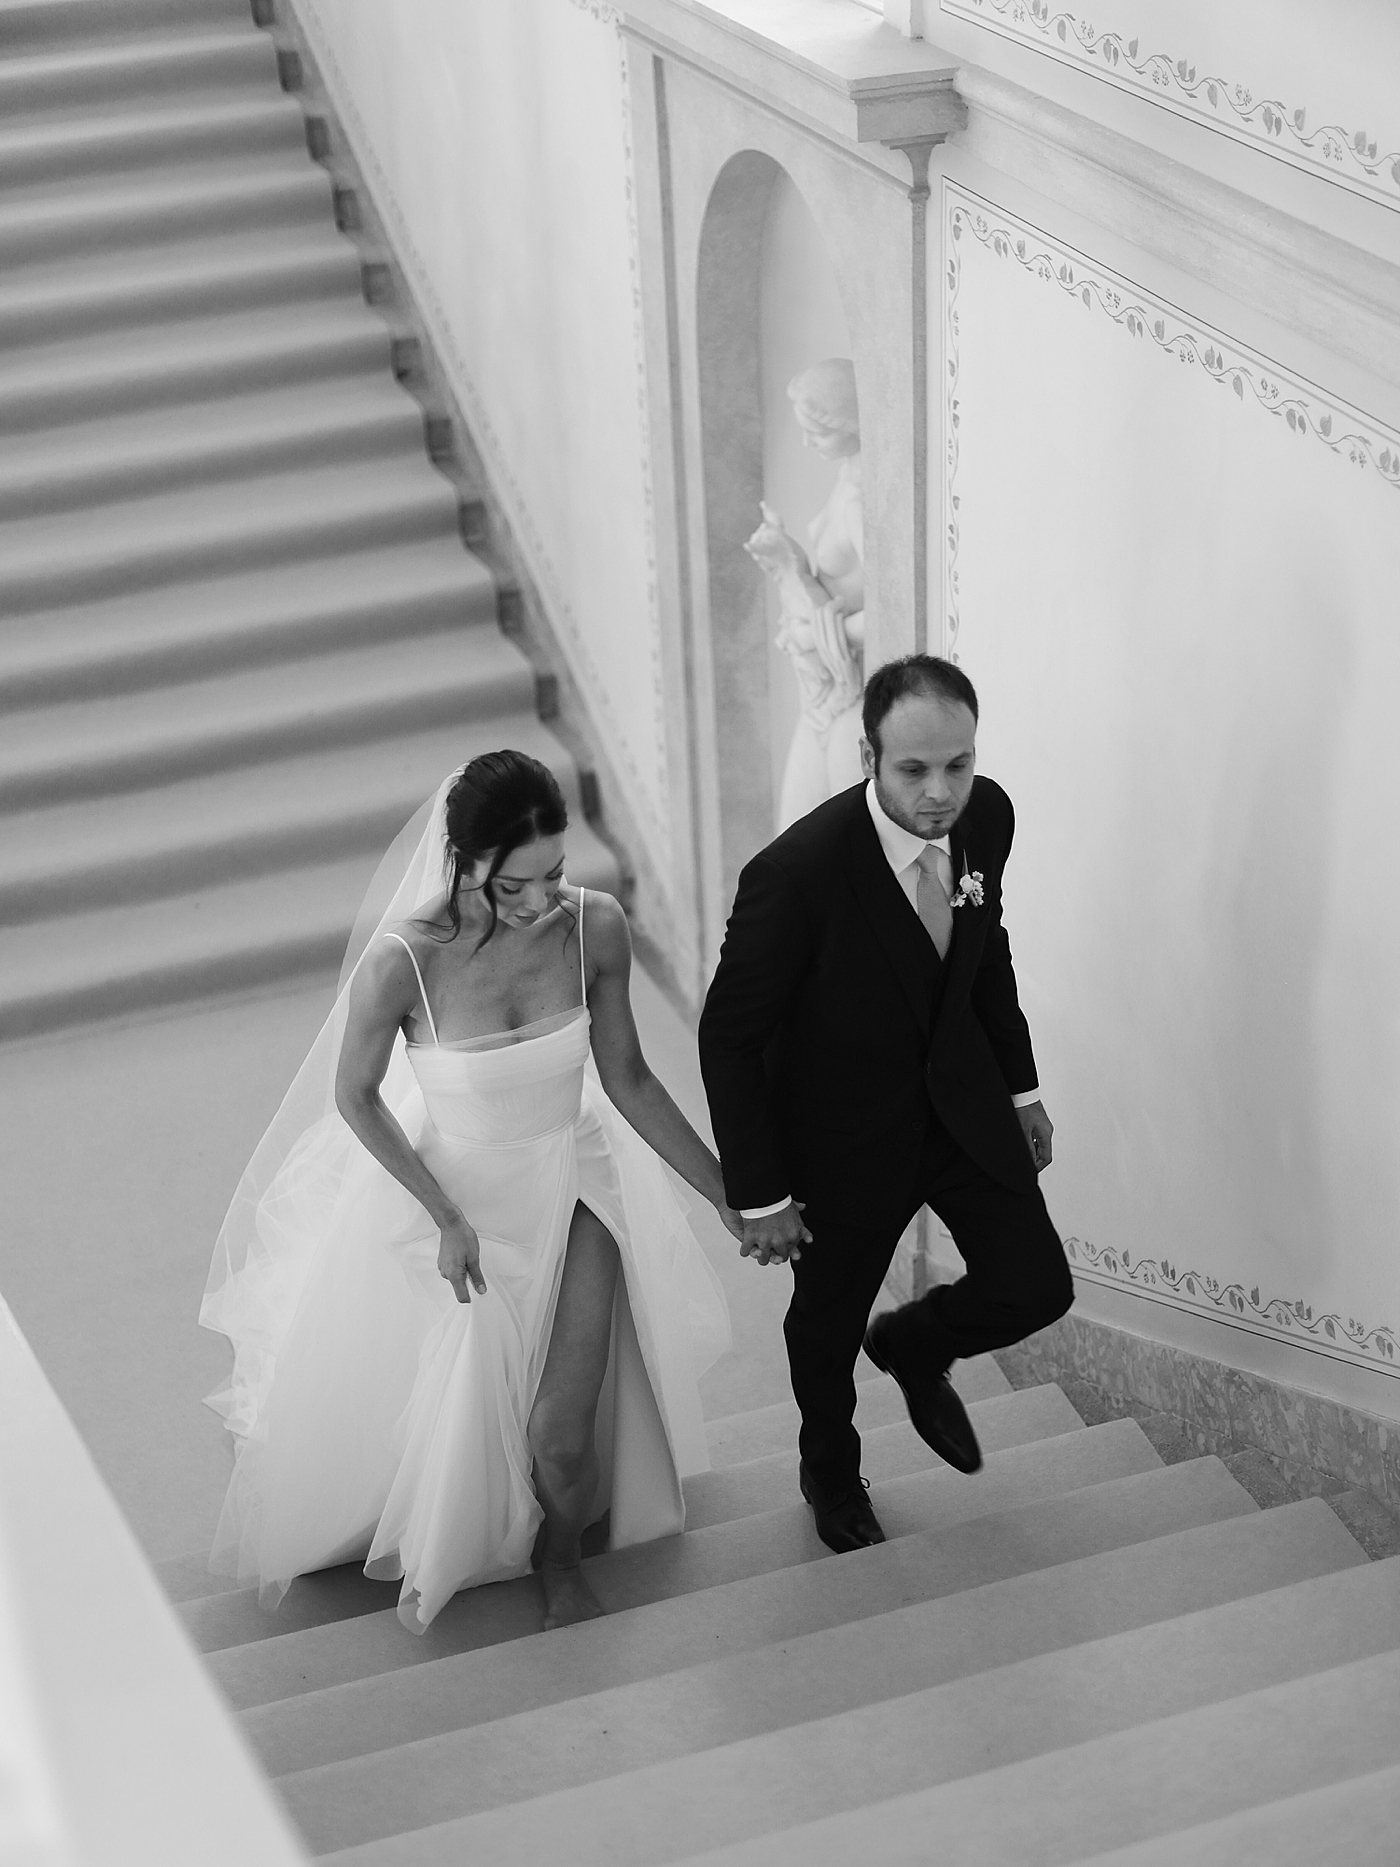 Black and white image of bride and groom on stairs | Image by Diane Sotero Photography